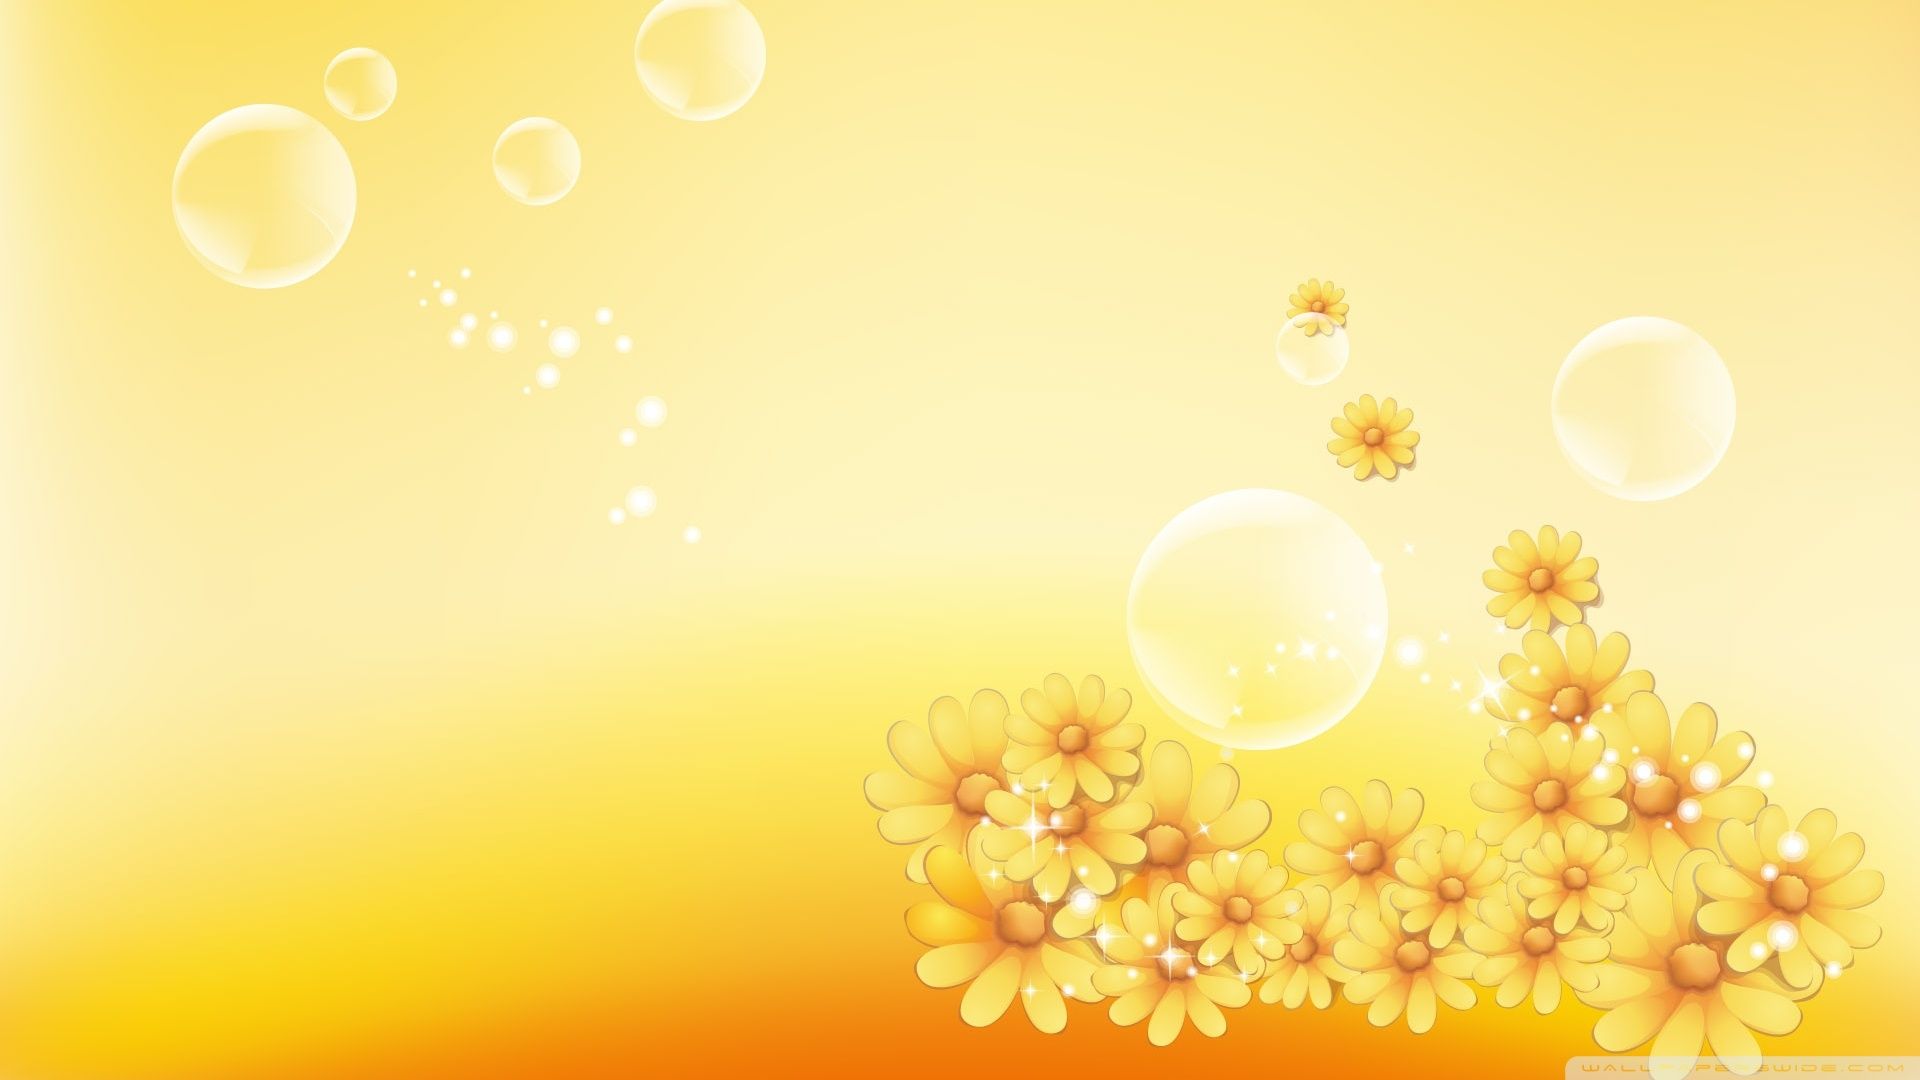 Yellow Flowers And Bubbles Ultra HD Desktop Background Wallpaper for 4K UHD TV, Tablet